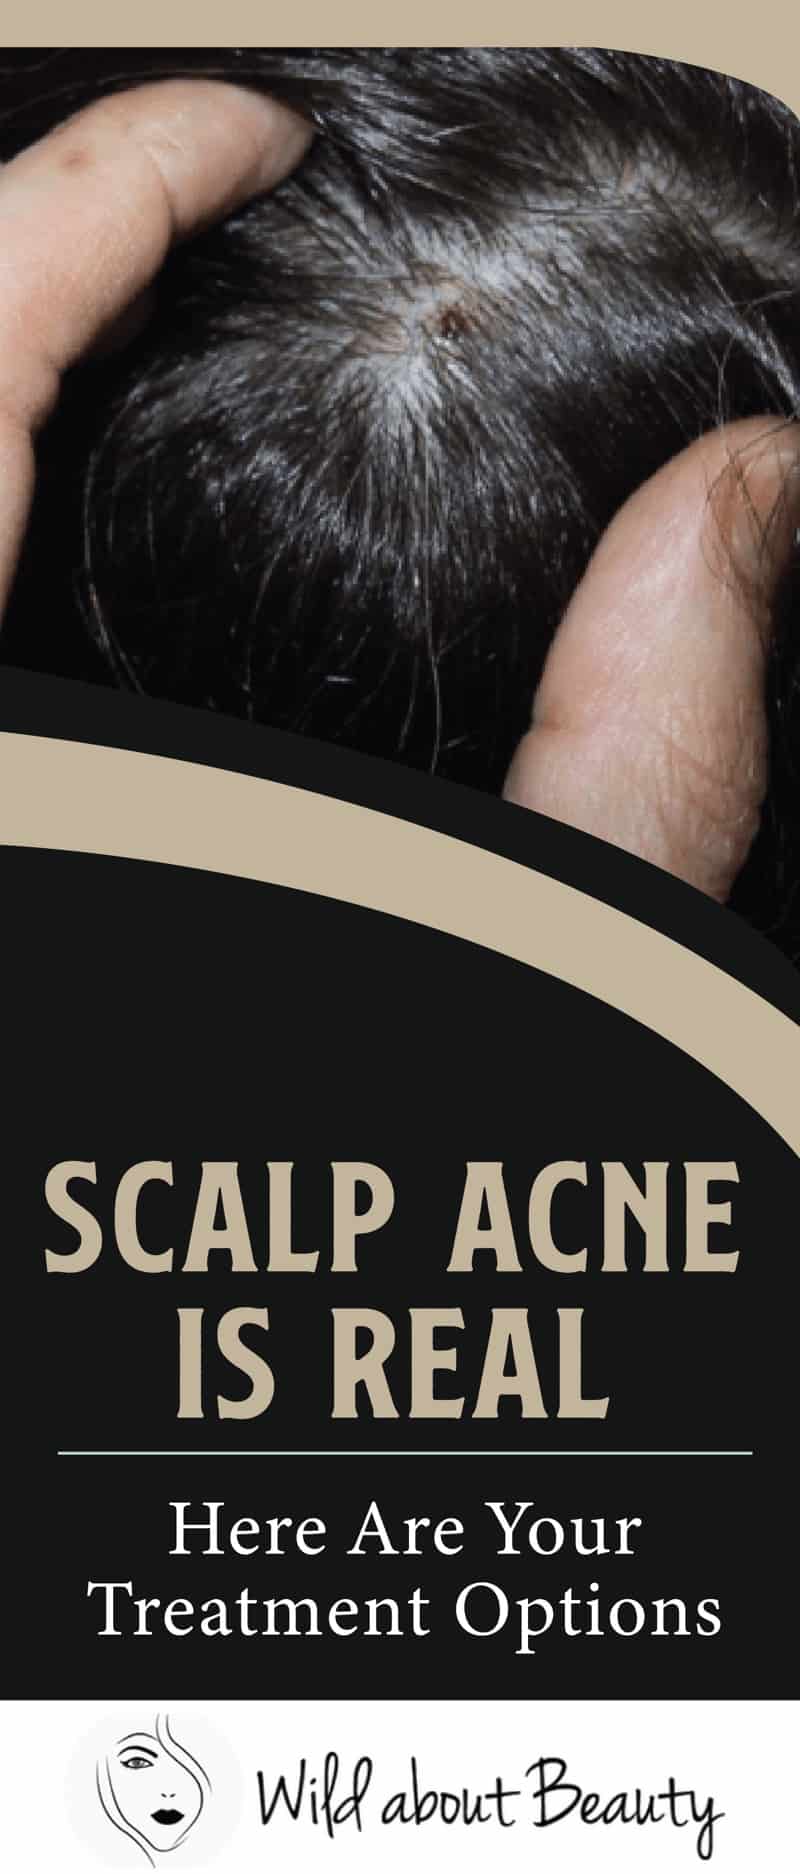 Acne natural treatment scalp How To